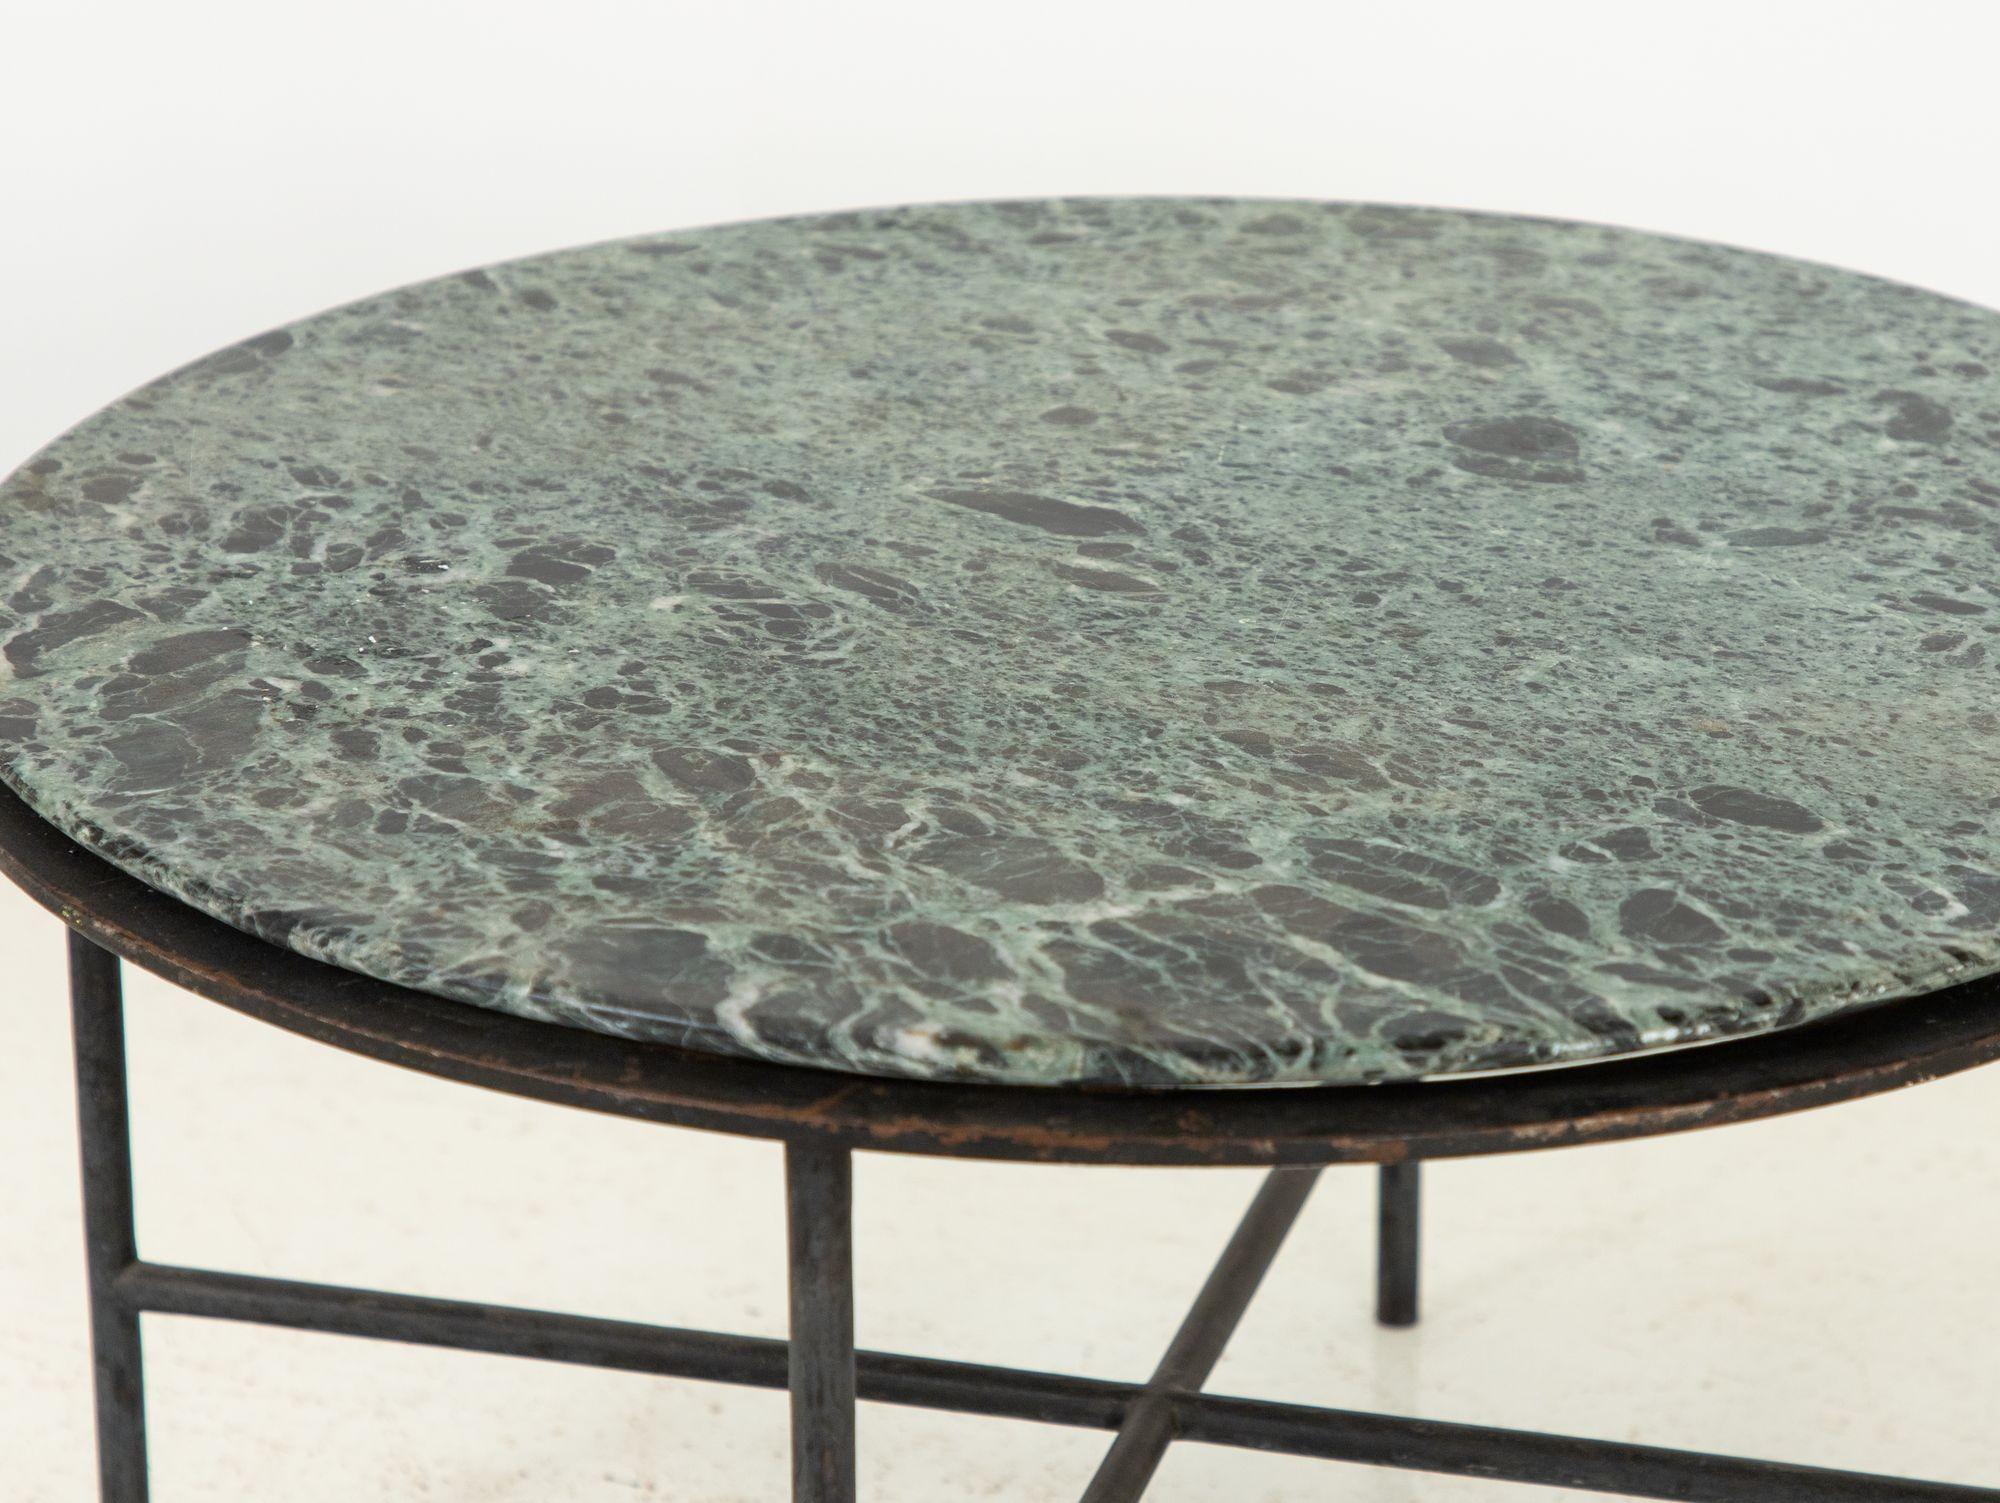 From the vibrant design tapestry of the 1960s, France emerges a captivating round iron base cocktail table crowned with a resplendent green marble top. The juxtaposition of robust industrial iron with the rich, natural allure of the green marble